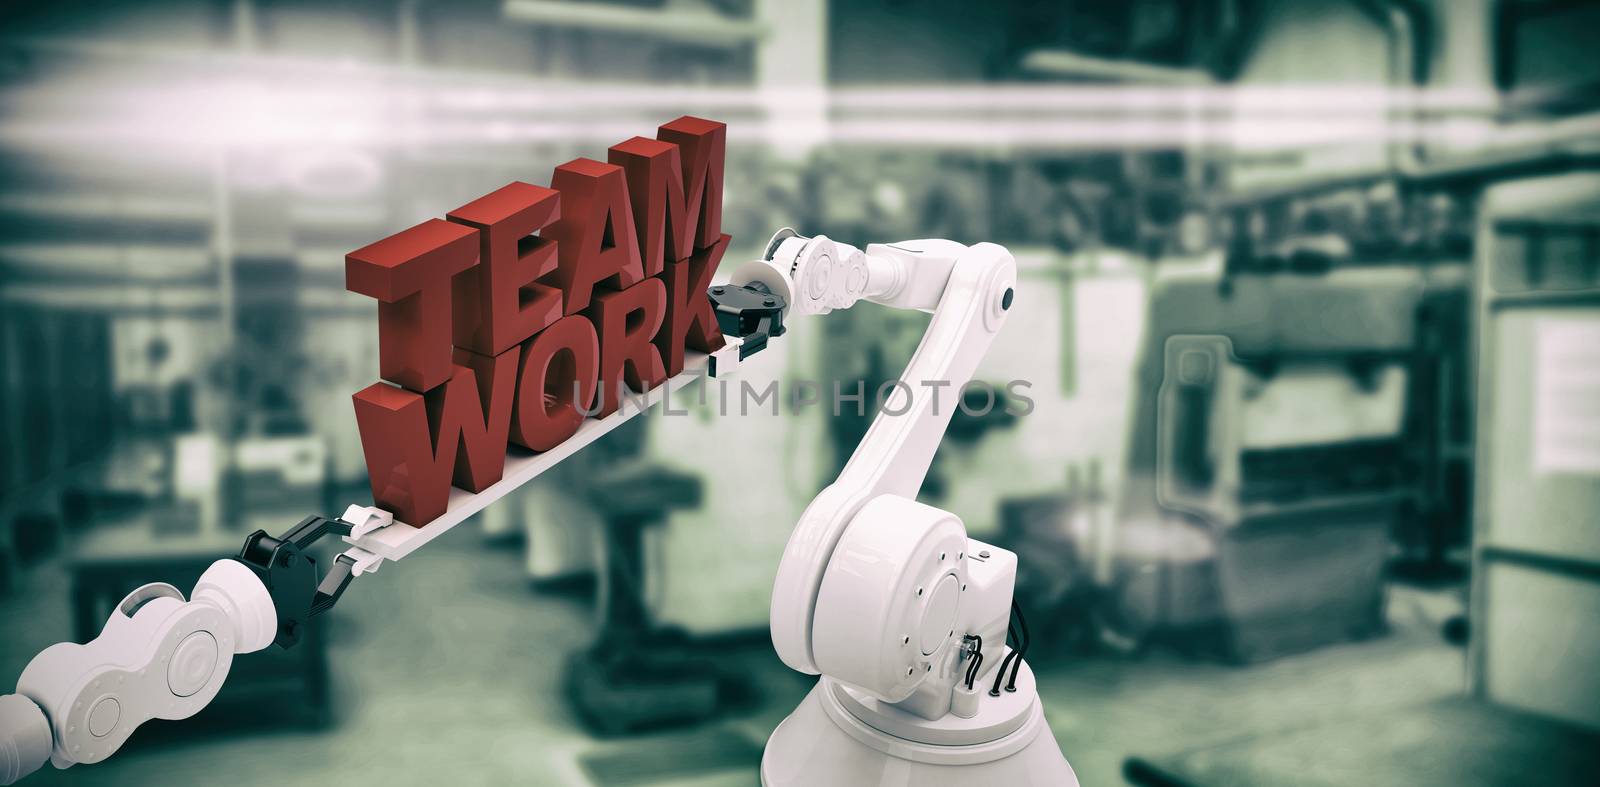 Robotic hand holding red team work text against factory